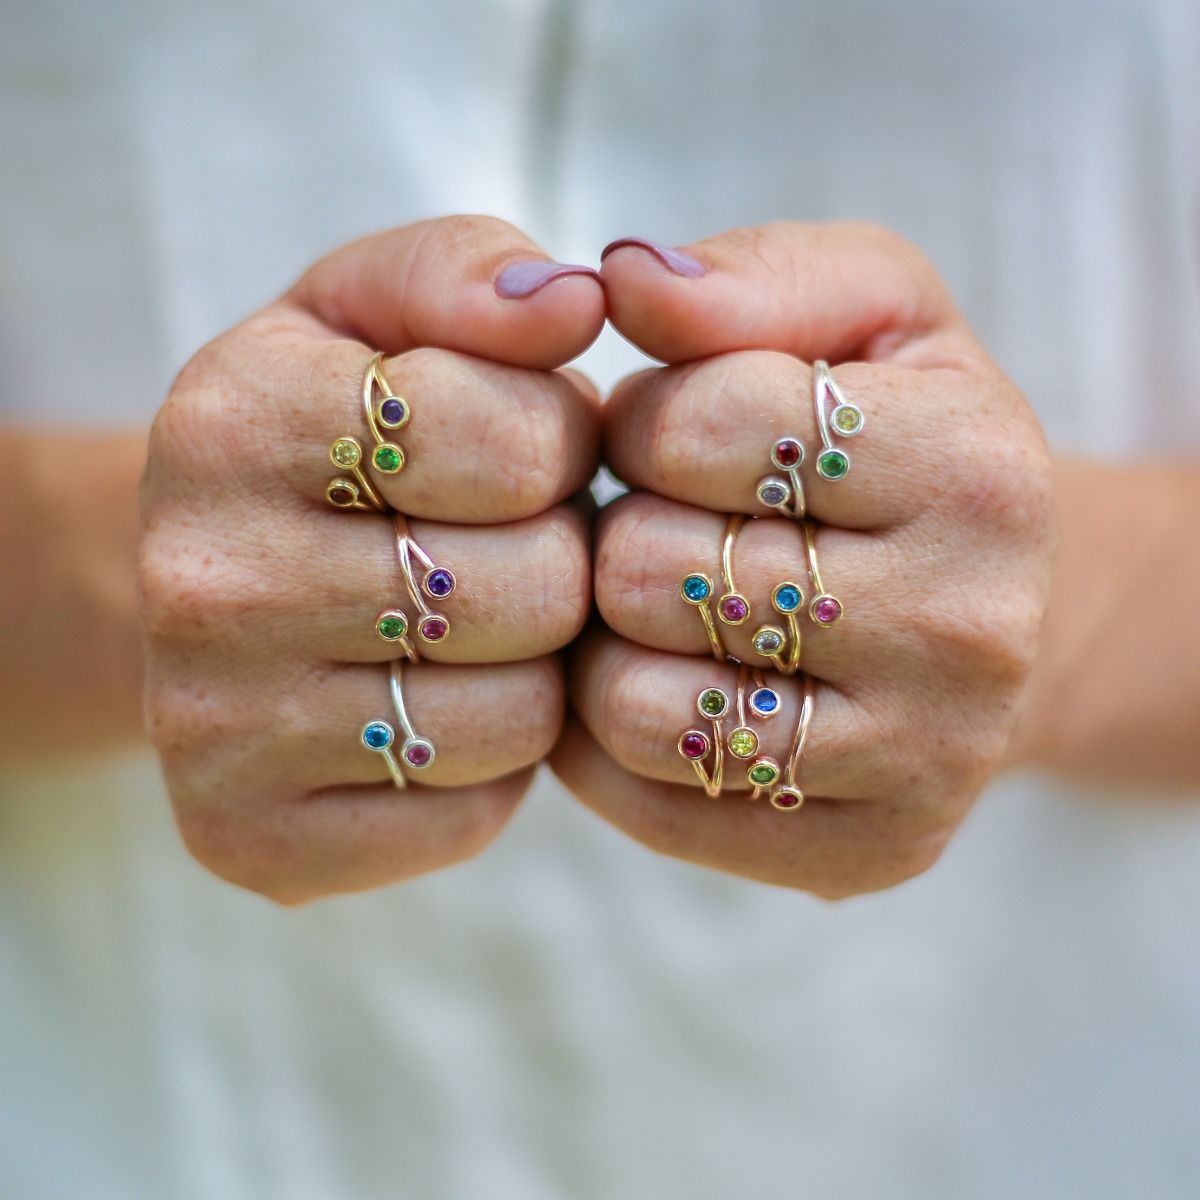 DIY Paperclip Rings // Tip Tuesday - YouTube